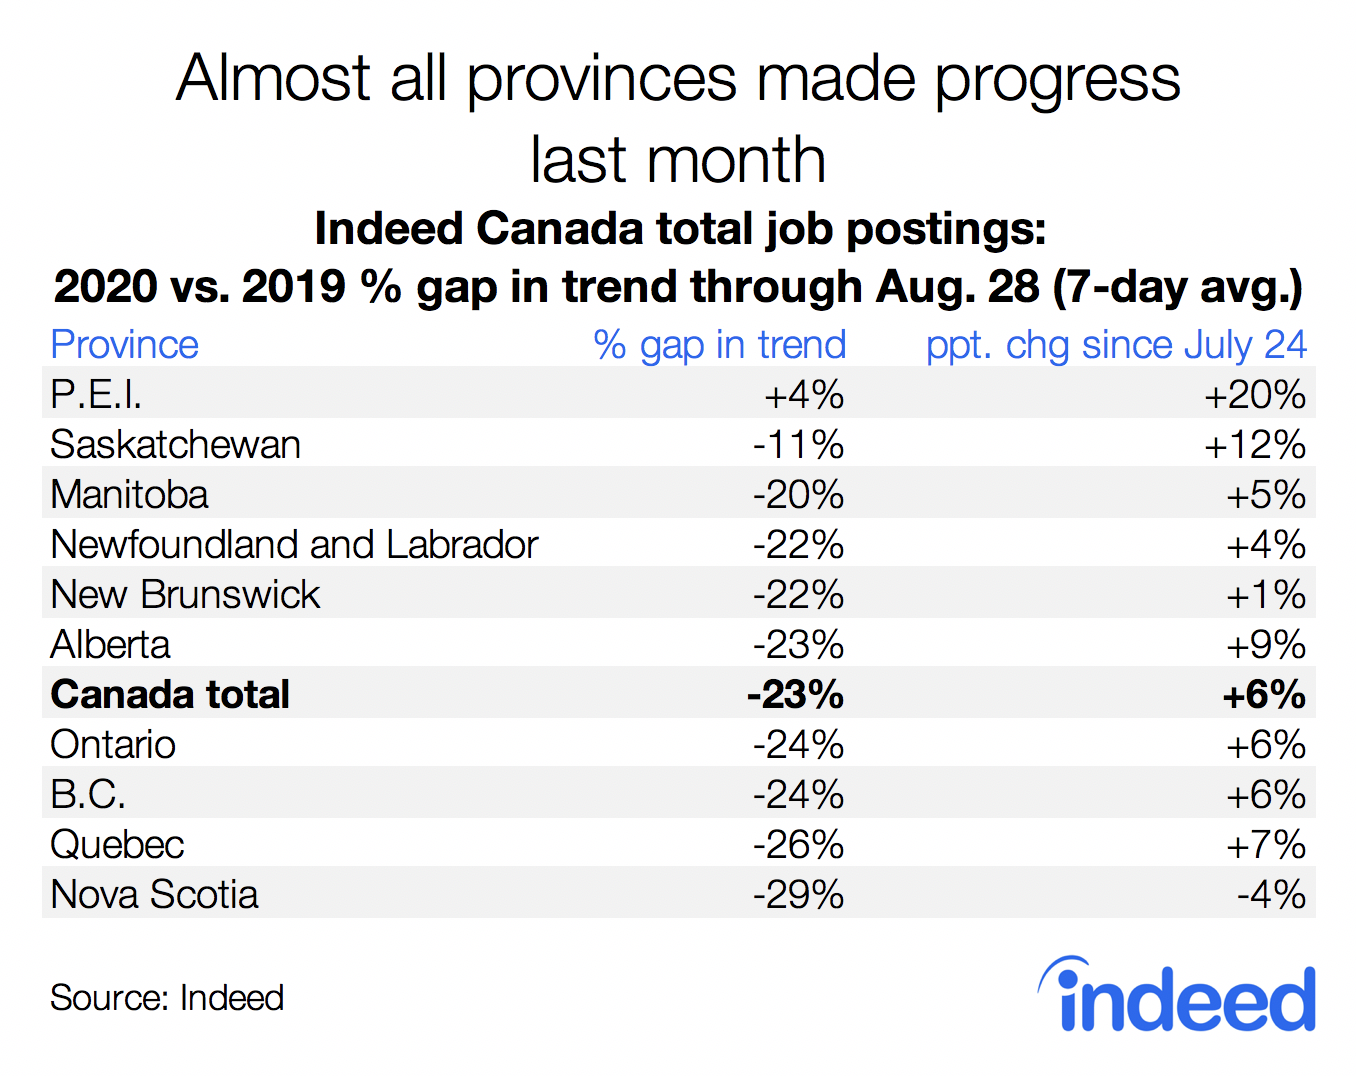 Table shows almost all provinces made progress last month.